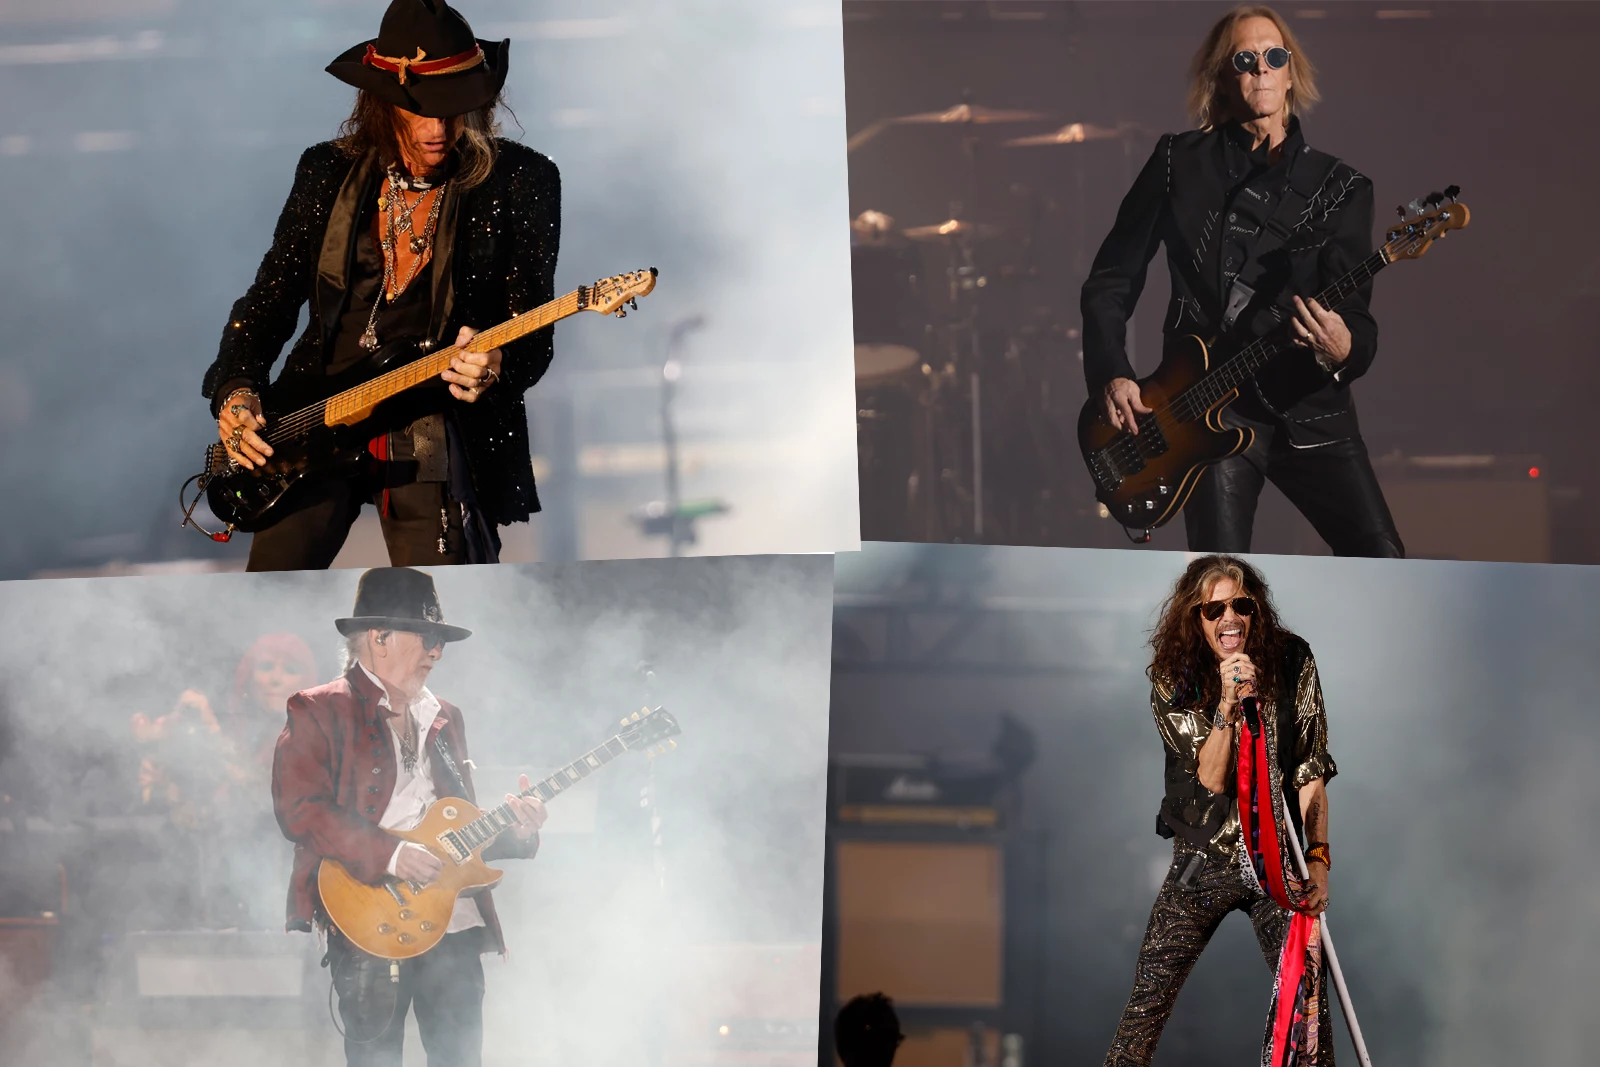 Aerosmith Releases Fenway Collection - Epic Rights